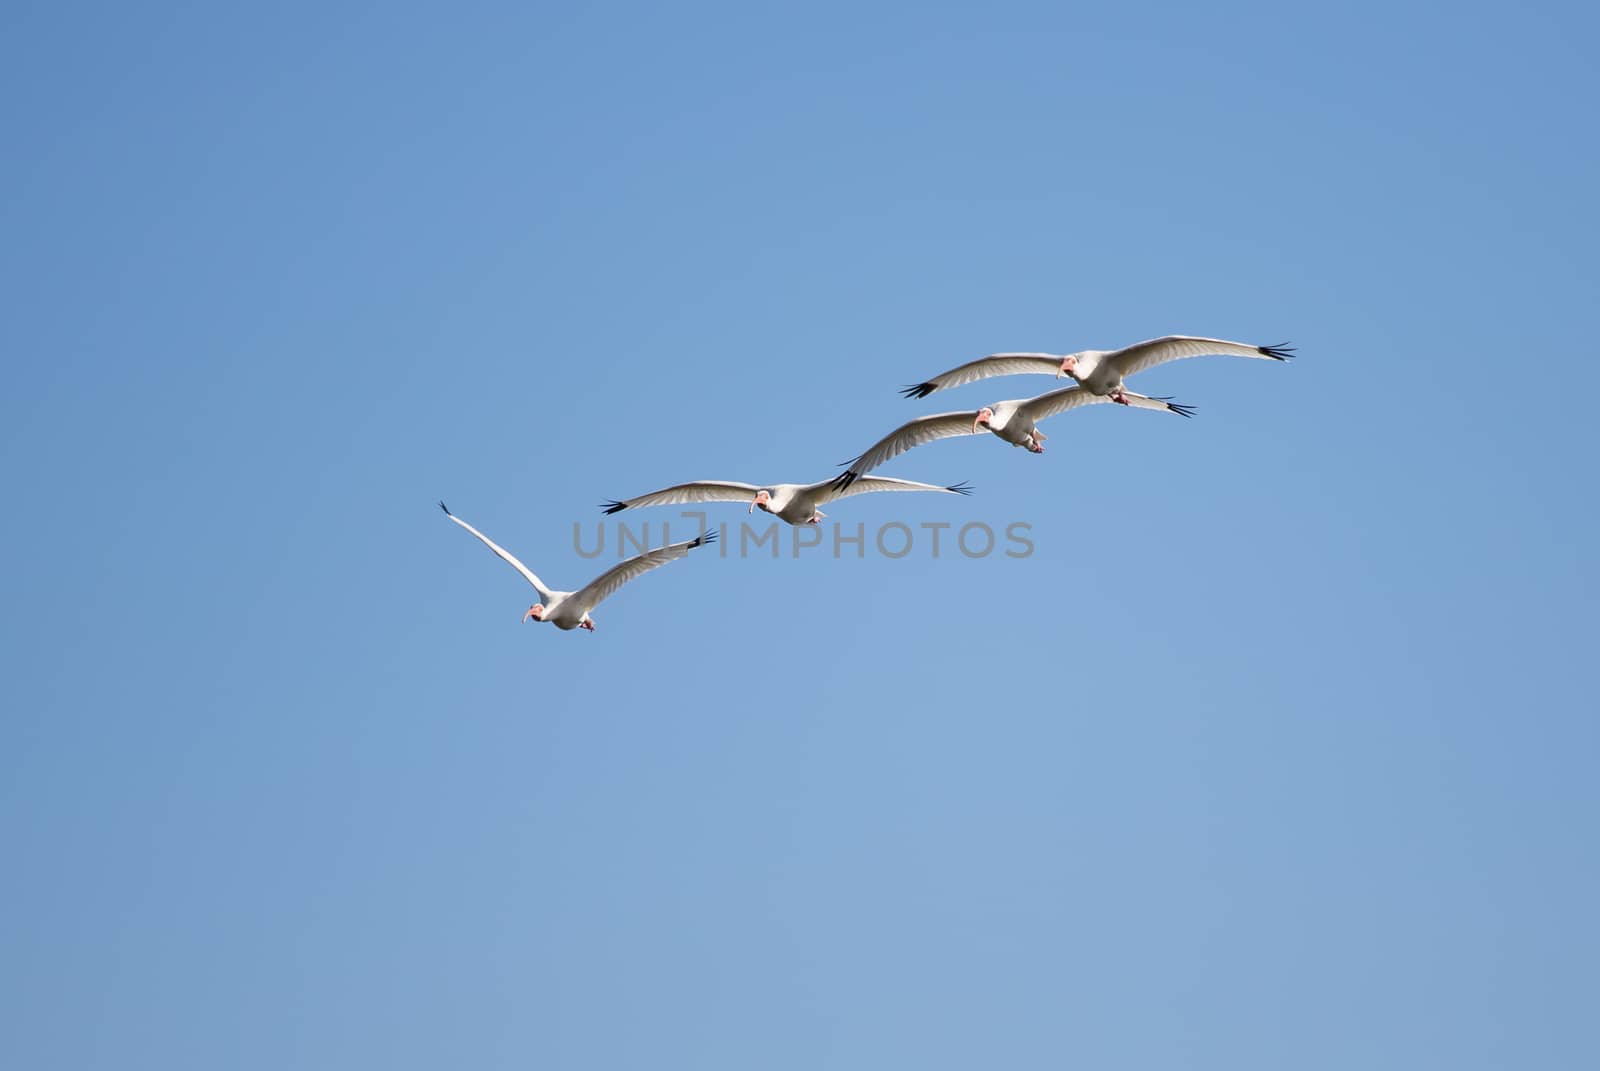 Four White Ibis gliding along on a nice warm winter day in Florida.